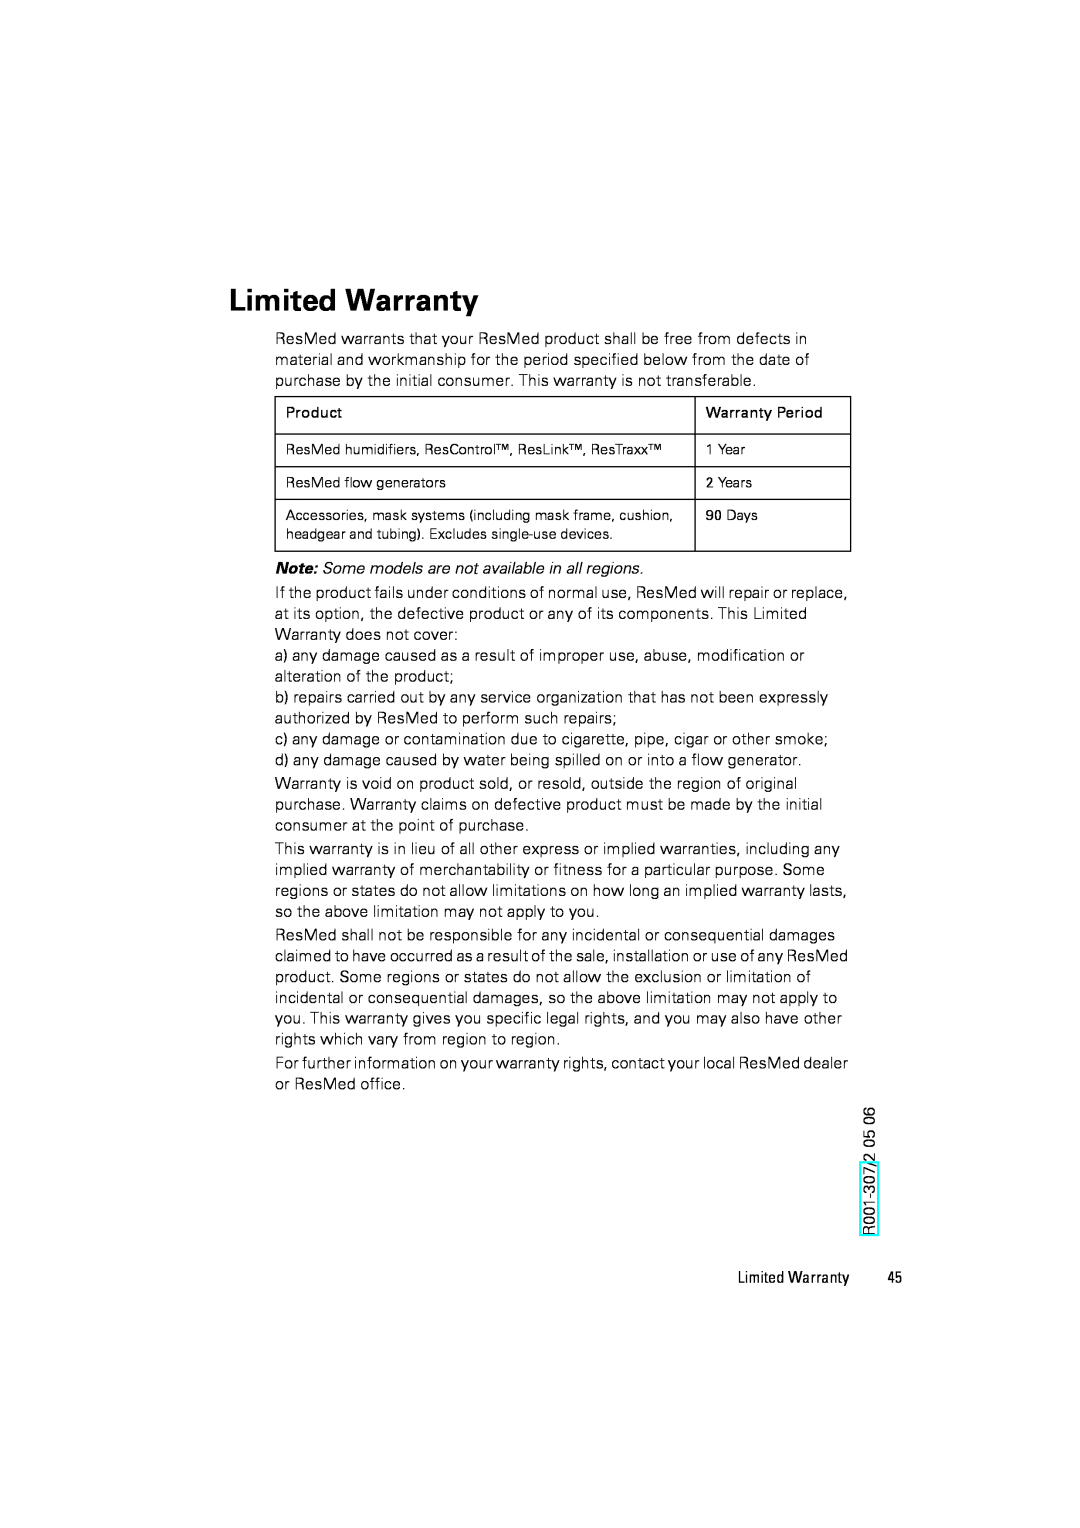 ResMed III ST-A user manual Limited Warranty 